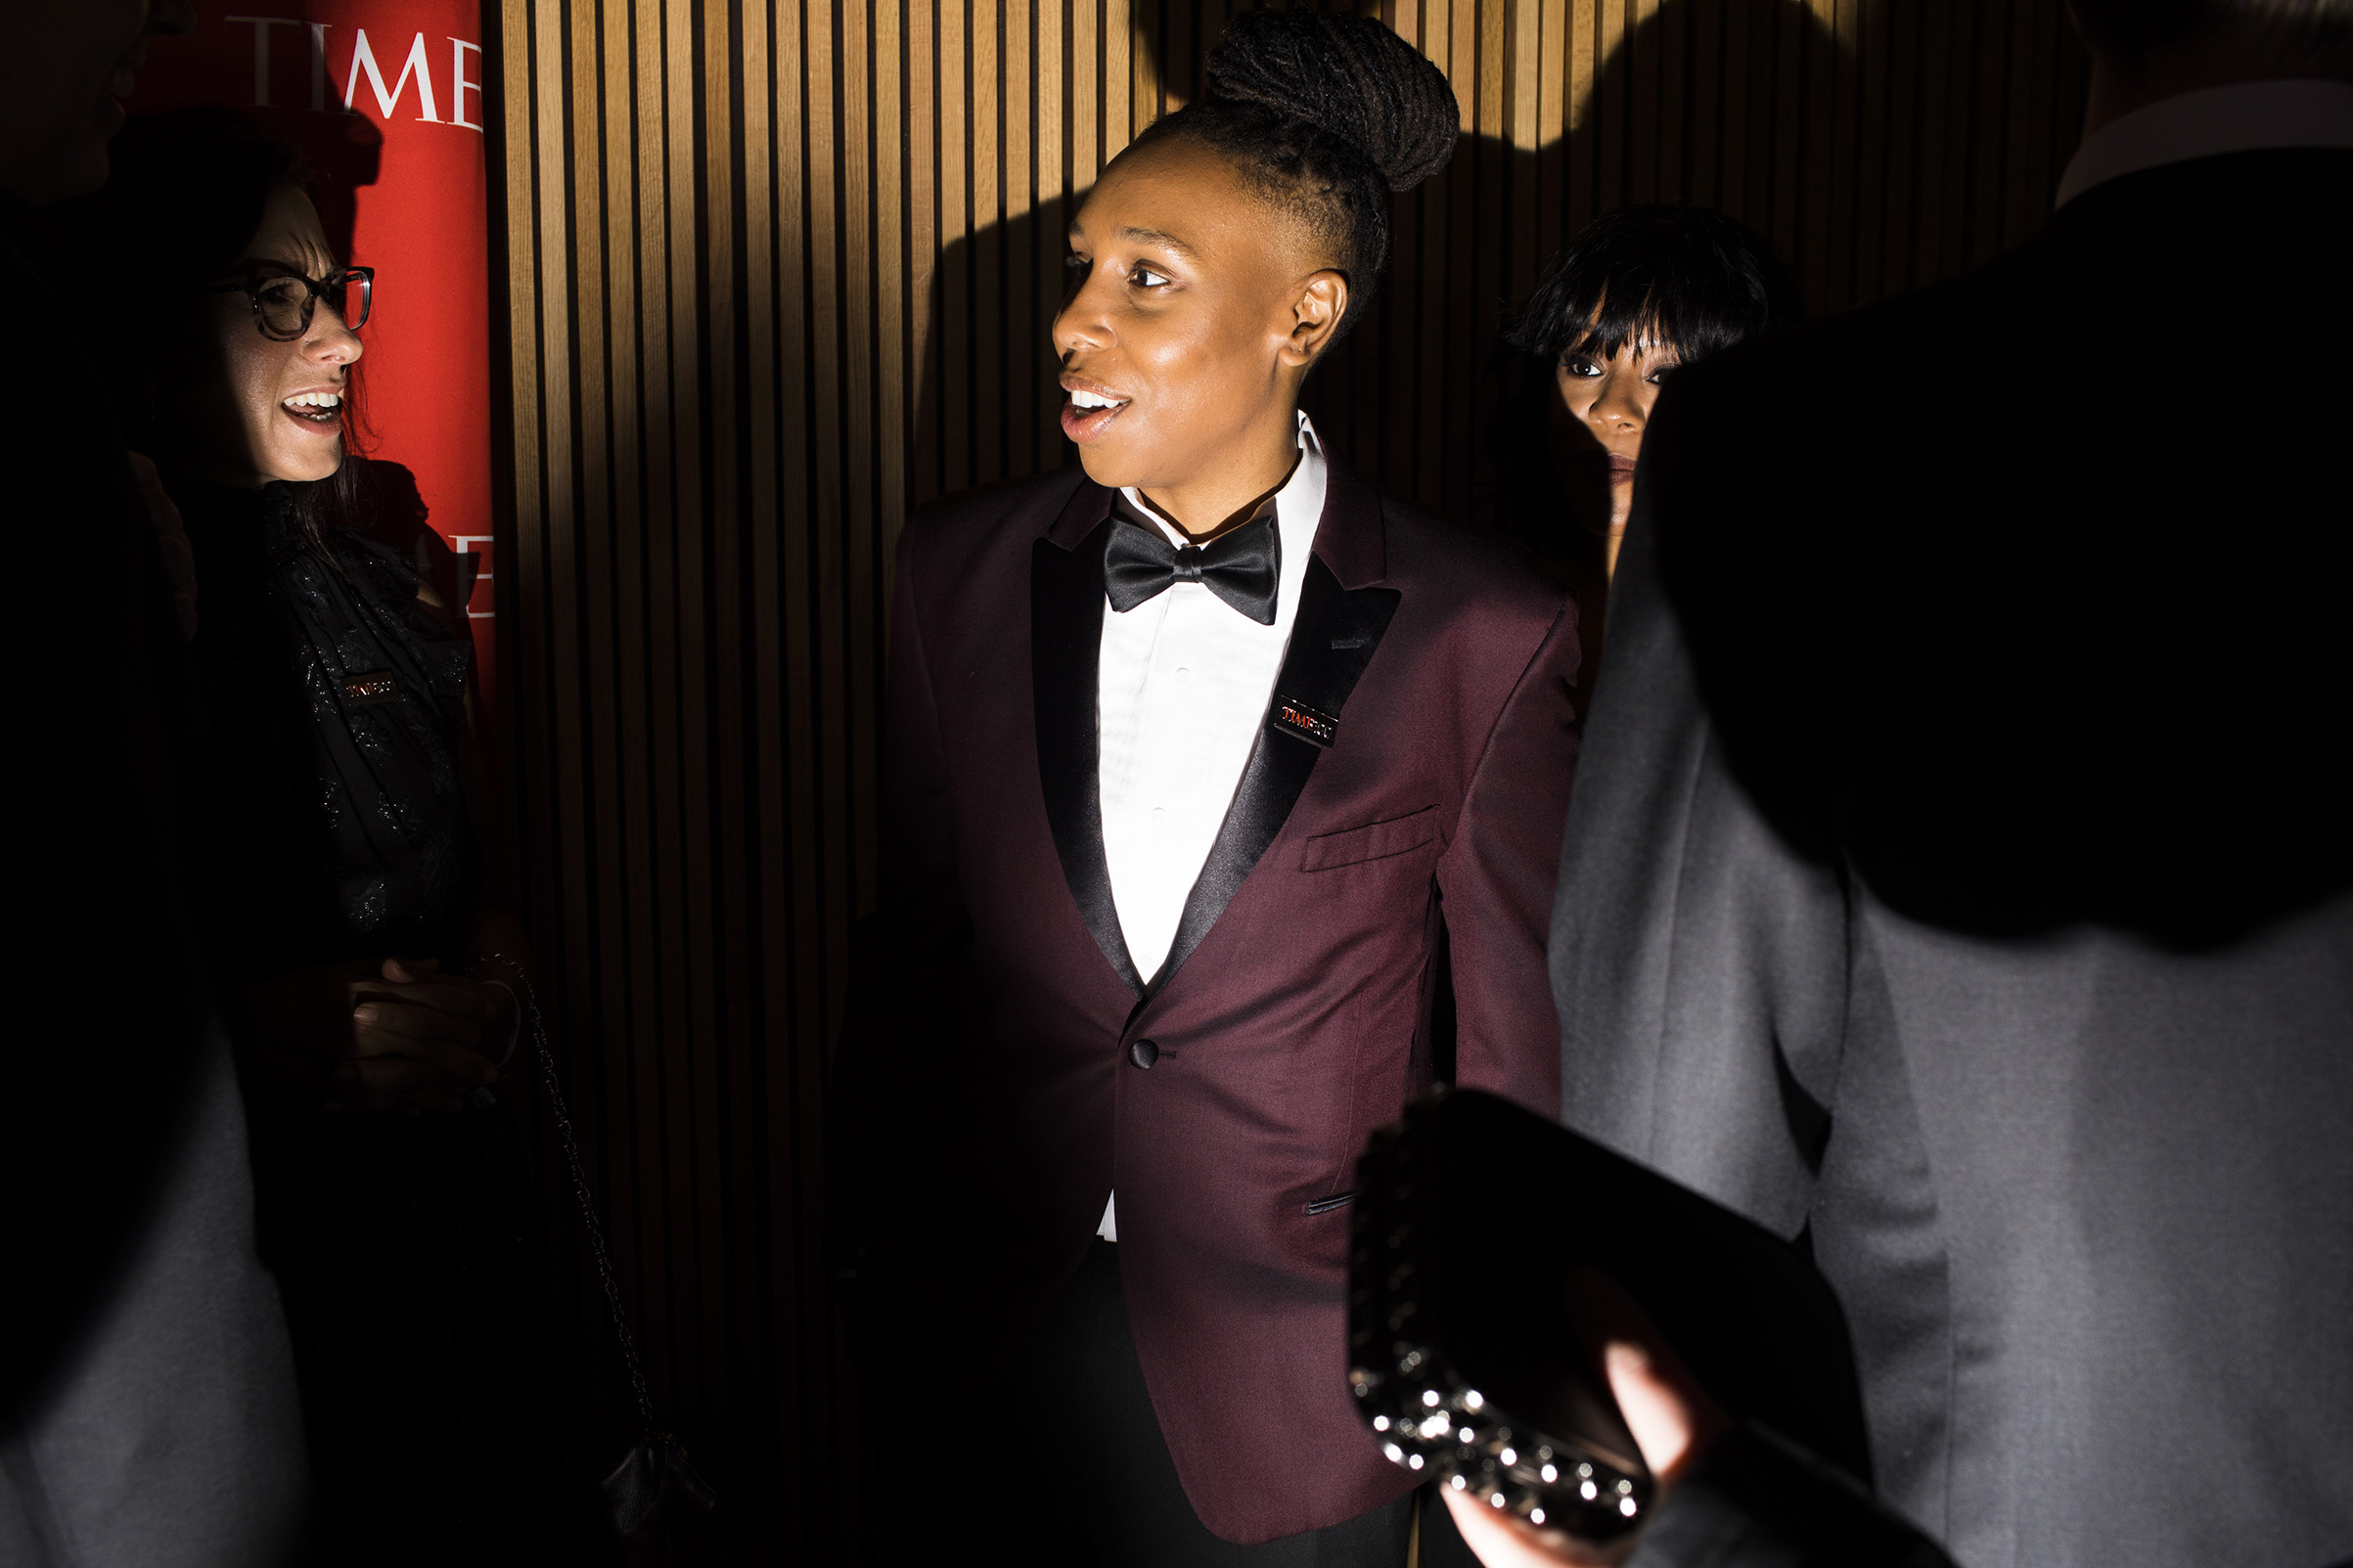 Lena Waithe at the Time 100 Gala at Jazz at Lincoln Center on April 24, 2018 in New York City. (Landon Nordeman for TIME)